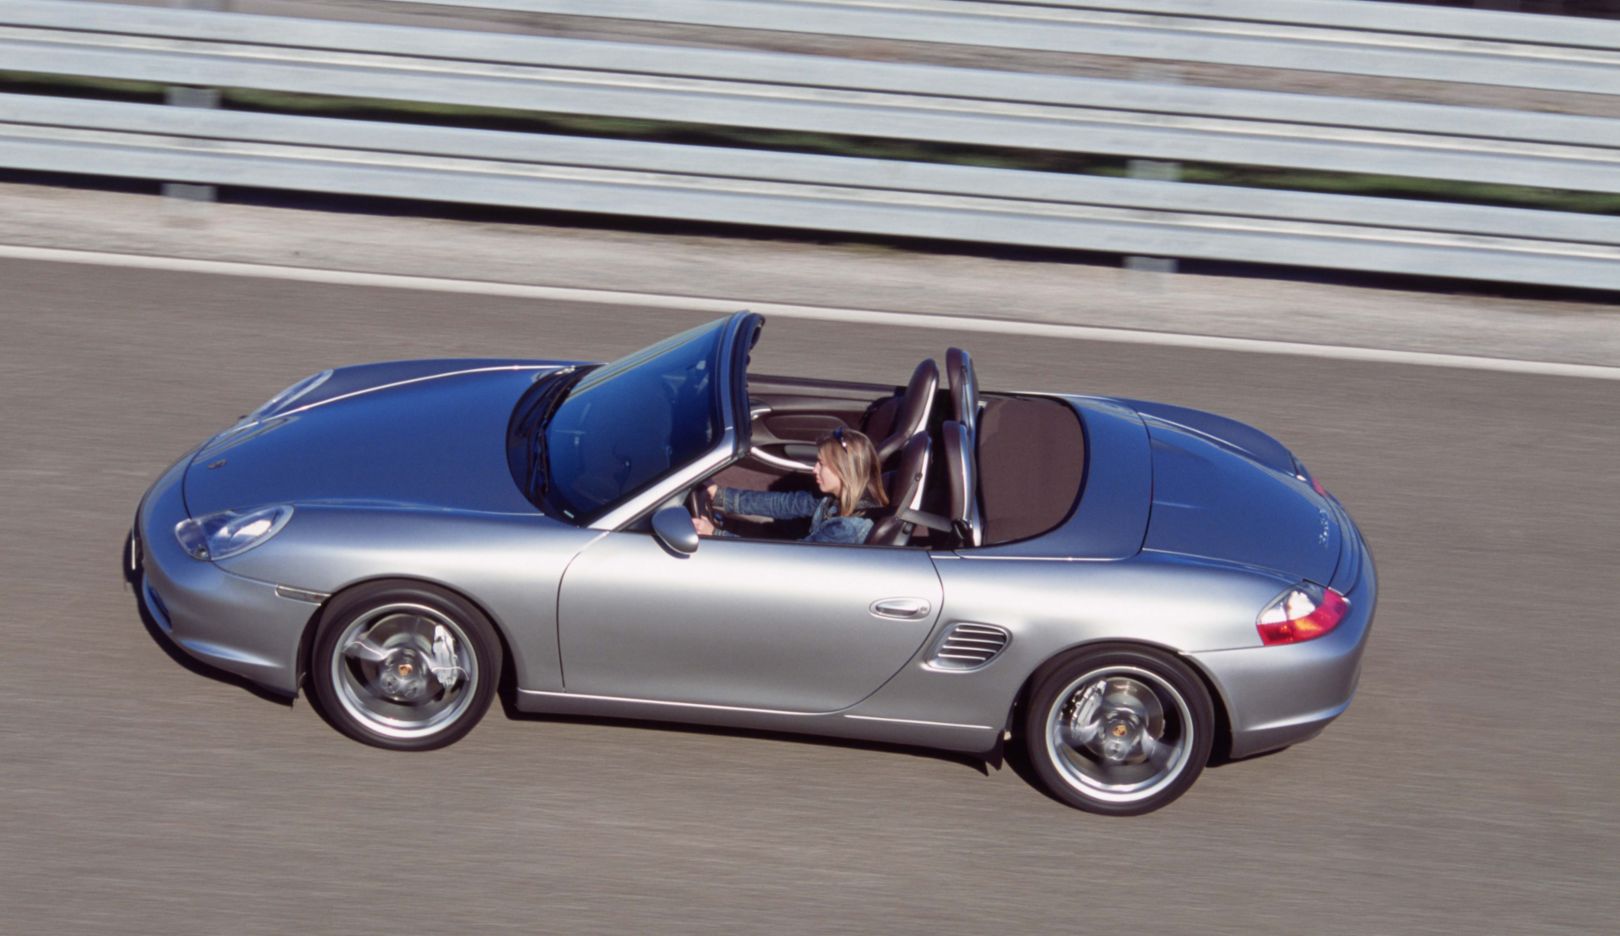 986 generation: 50 years of the 550 Spyder special edition (2004). The Boxster S special edition evokes its kinship to the 550 Spyder. Its body lines and timeless elegance are reminiscent of the first thoroughbred Porsche race car. 